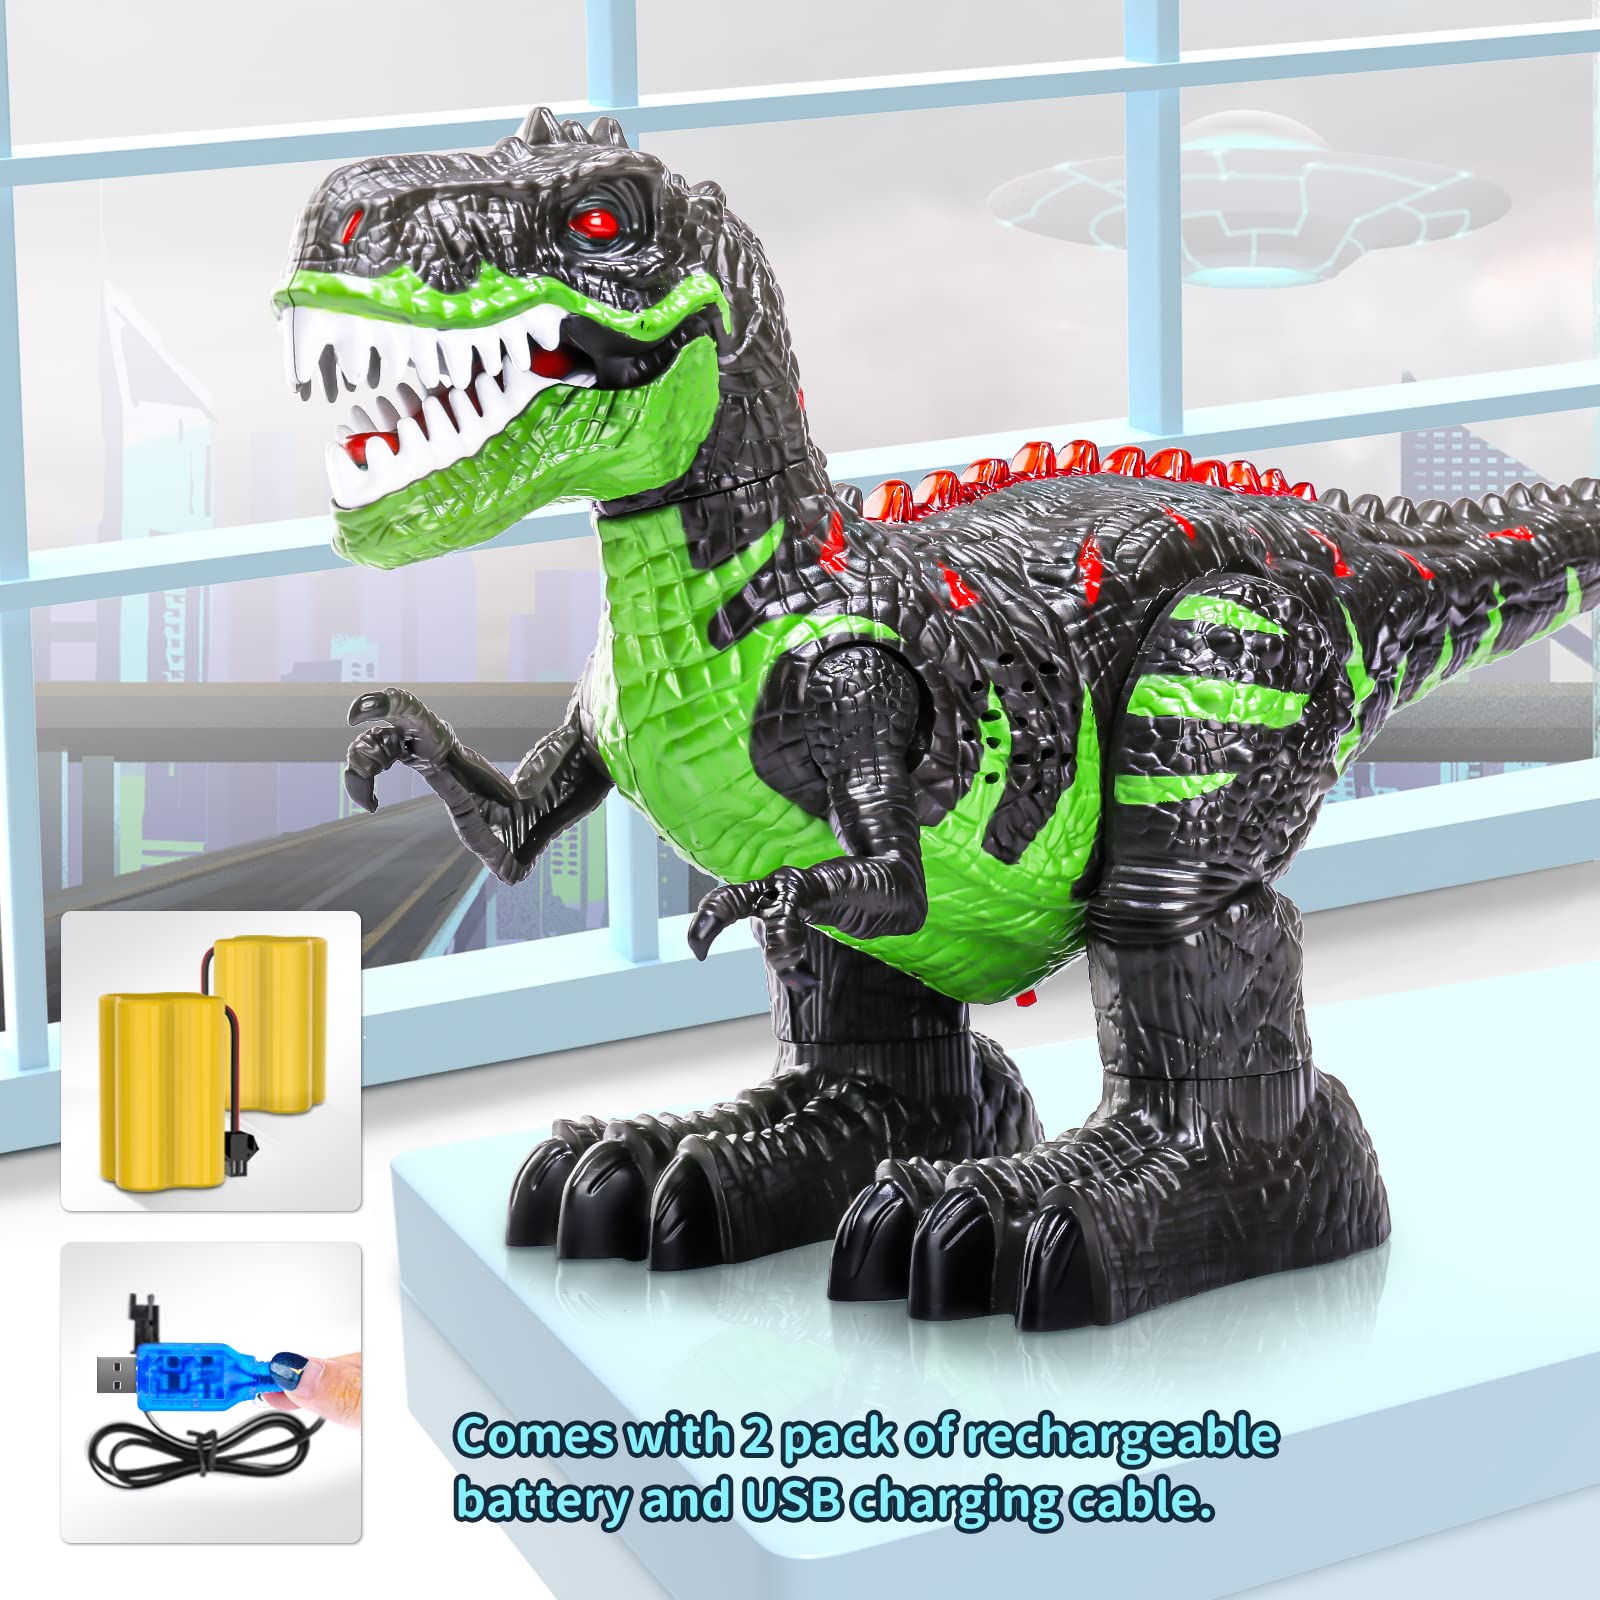 TEMI 2.4G Remote Control T-rex Jurassic Dinosaur Toy for Kids 3-5, Rechargeable Electric Walking Realistic Tyrannosaurus Dino Robot with Light & Sounds, Birthday Gift for 3 4 5 6 7 8 Years Boys Girls